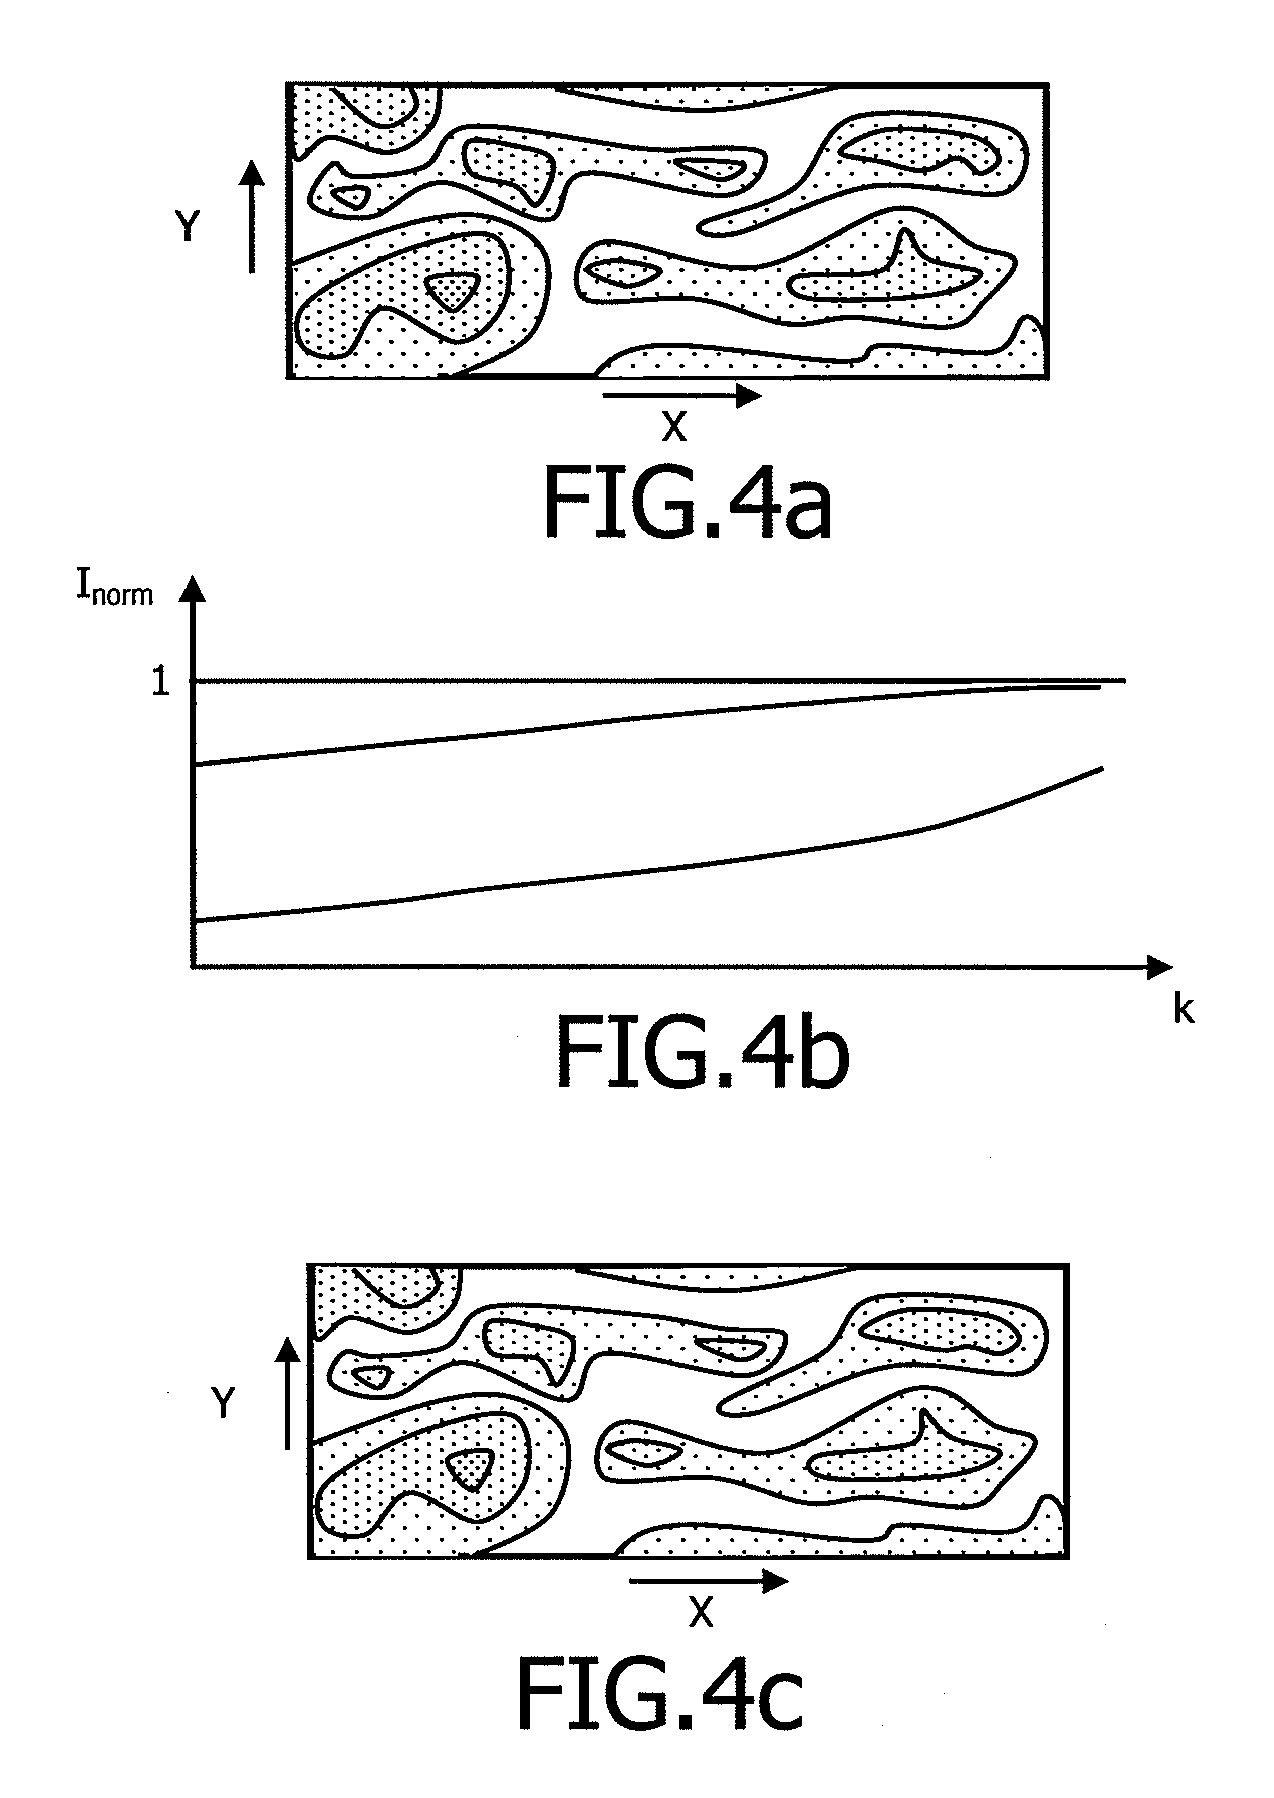 Method for optimising the focussing of waves through an aberration-inducing element